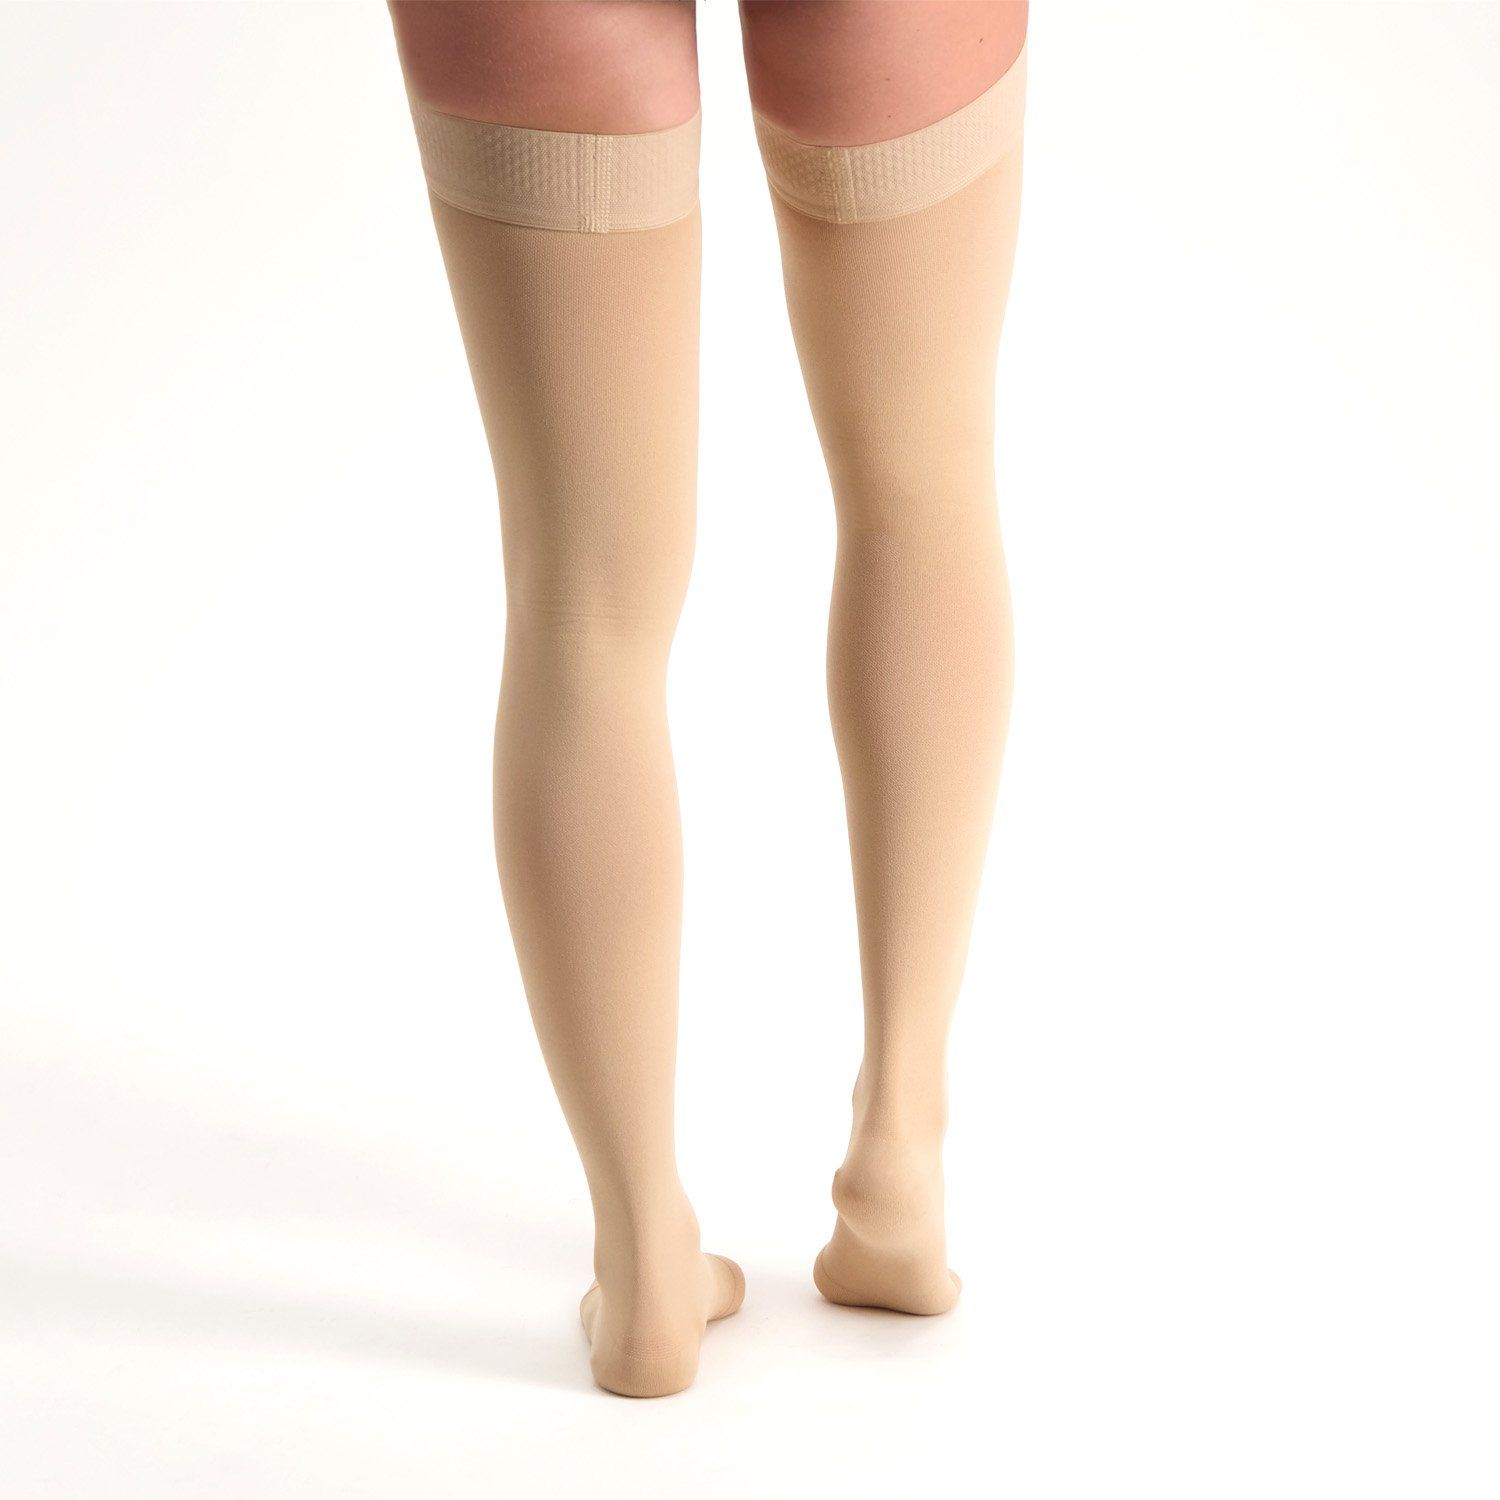 dunimed premium comfort compression stockings groin length open toe legs